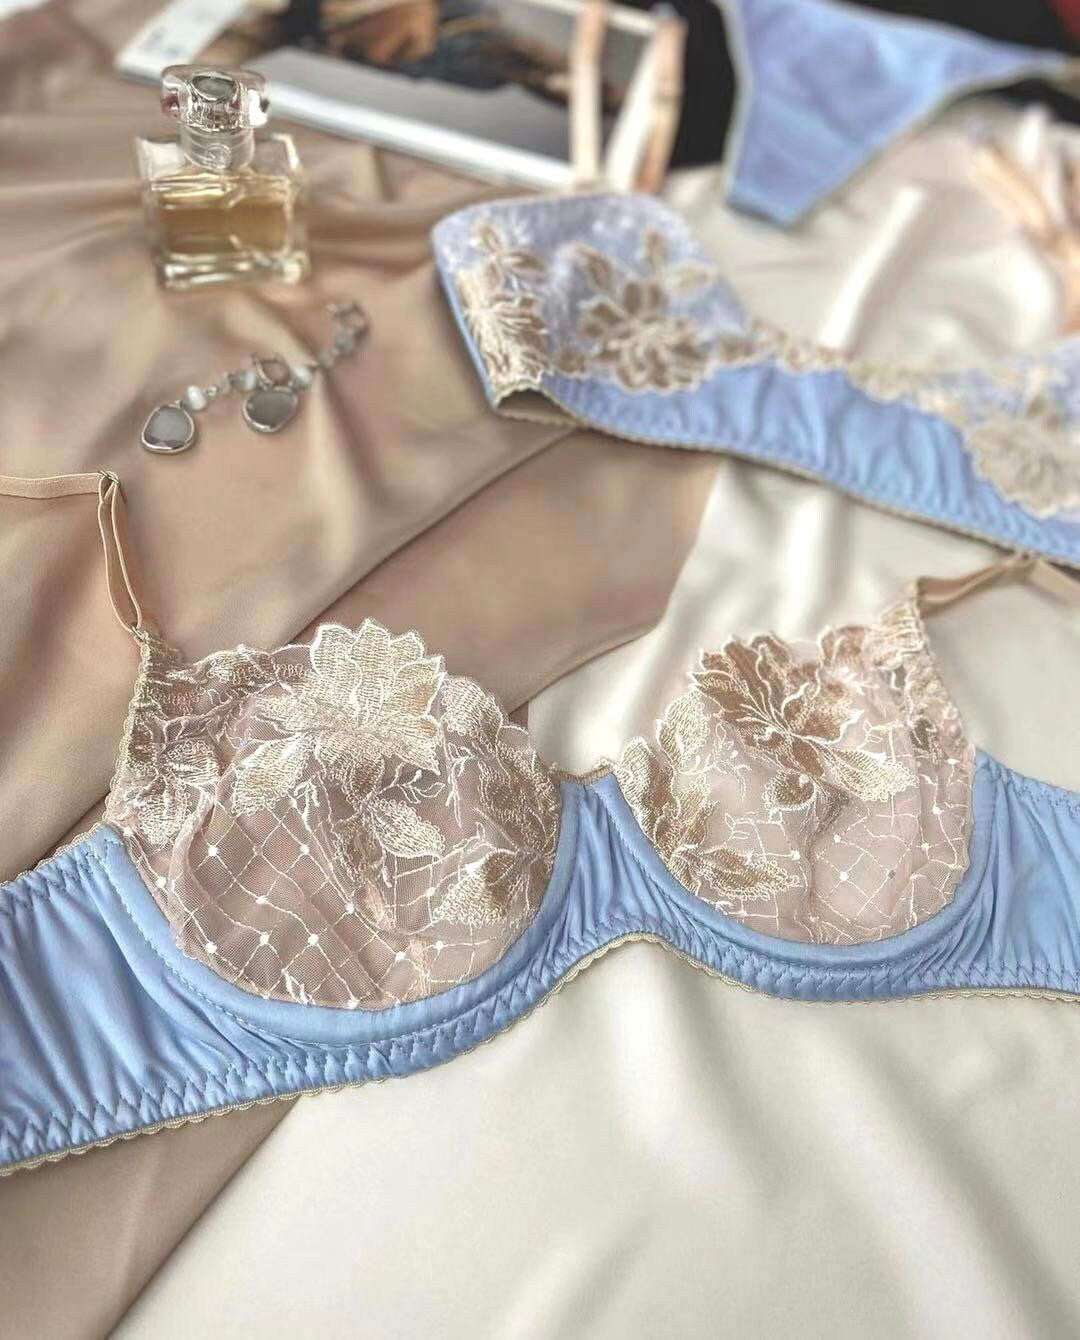 Gloria airy blue and gold lingerie set